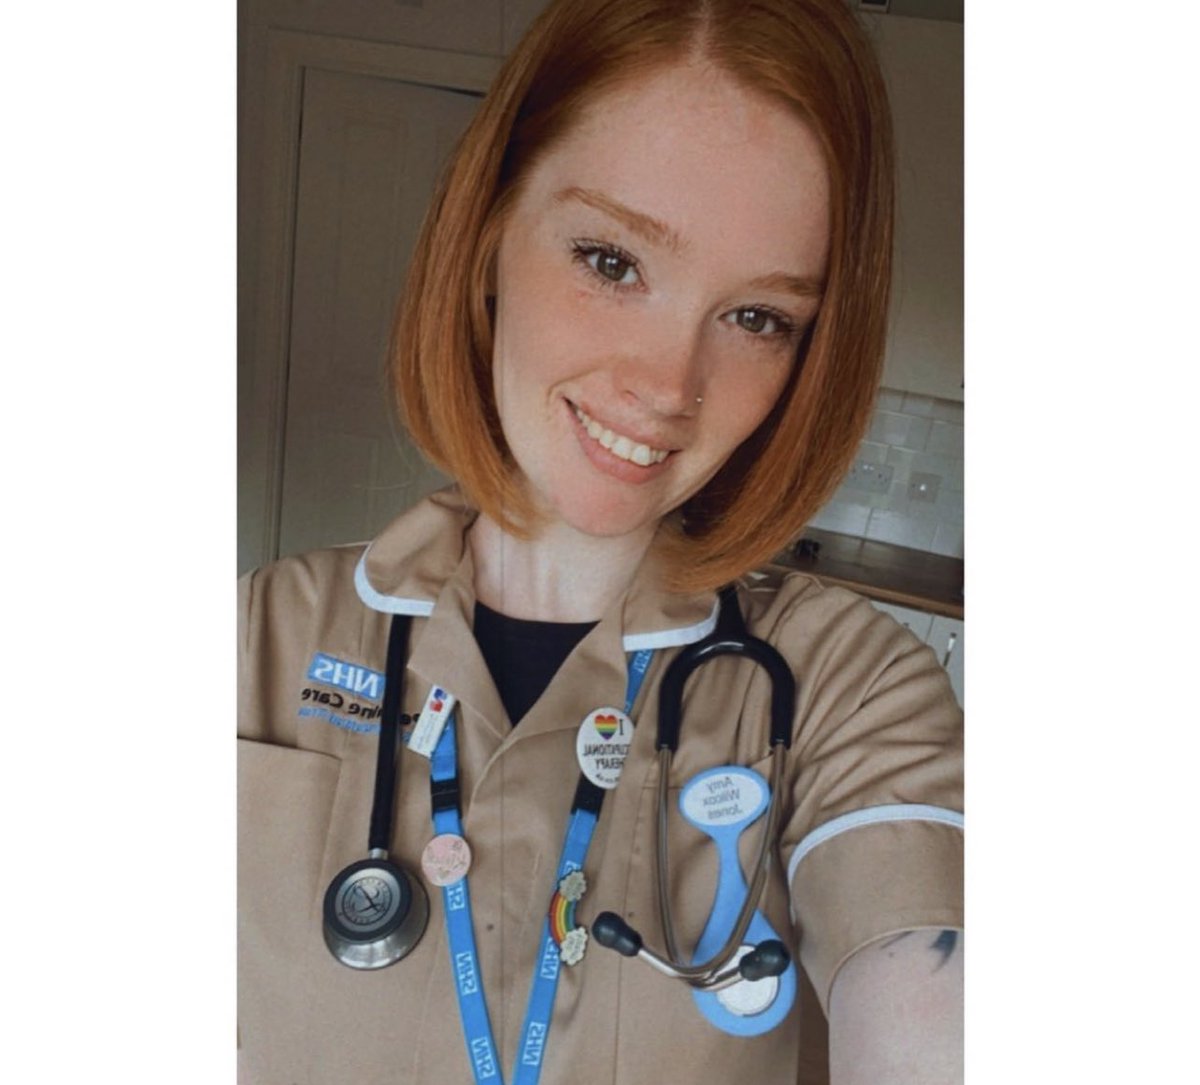 This day 4 yrs ago I was a patient on a mental health ward. Now I’m training to be a nurse in the same trust, on the same ward. Mental health nursing was definitely my calling, so grateful for my journey that got me here❤️ #MHNursesDay #mentalhealthnursesday #PennineCarePeople